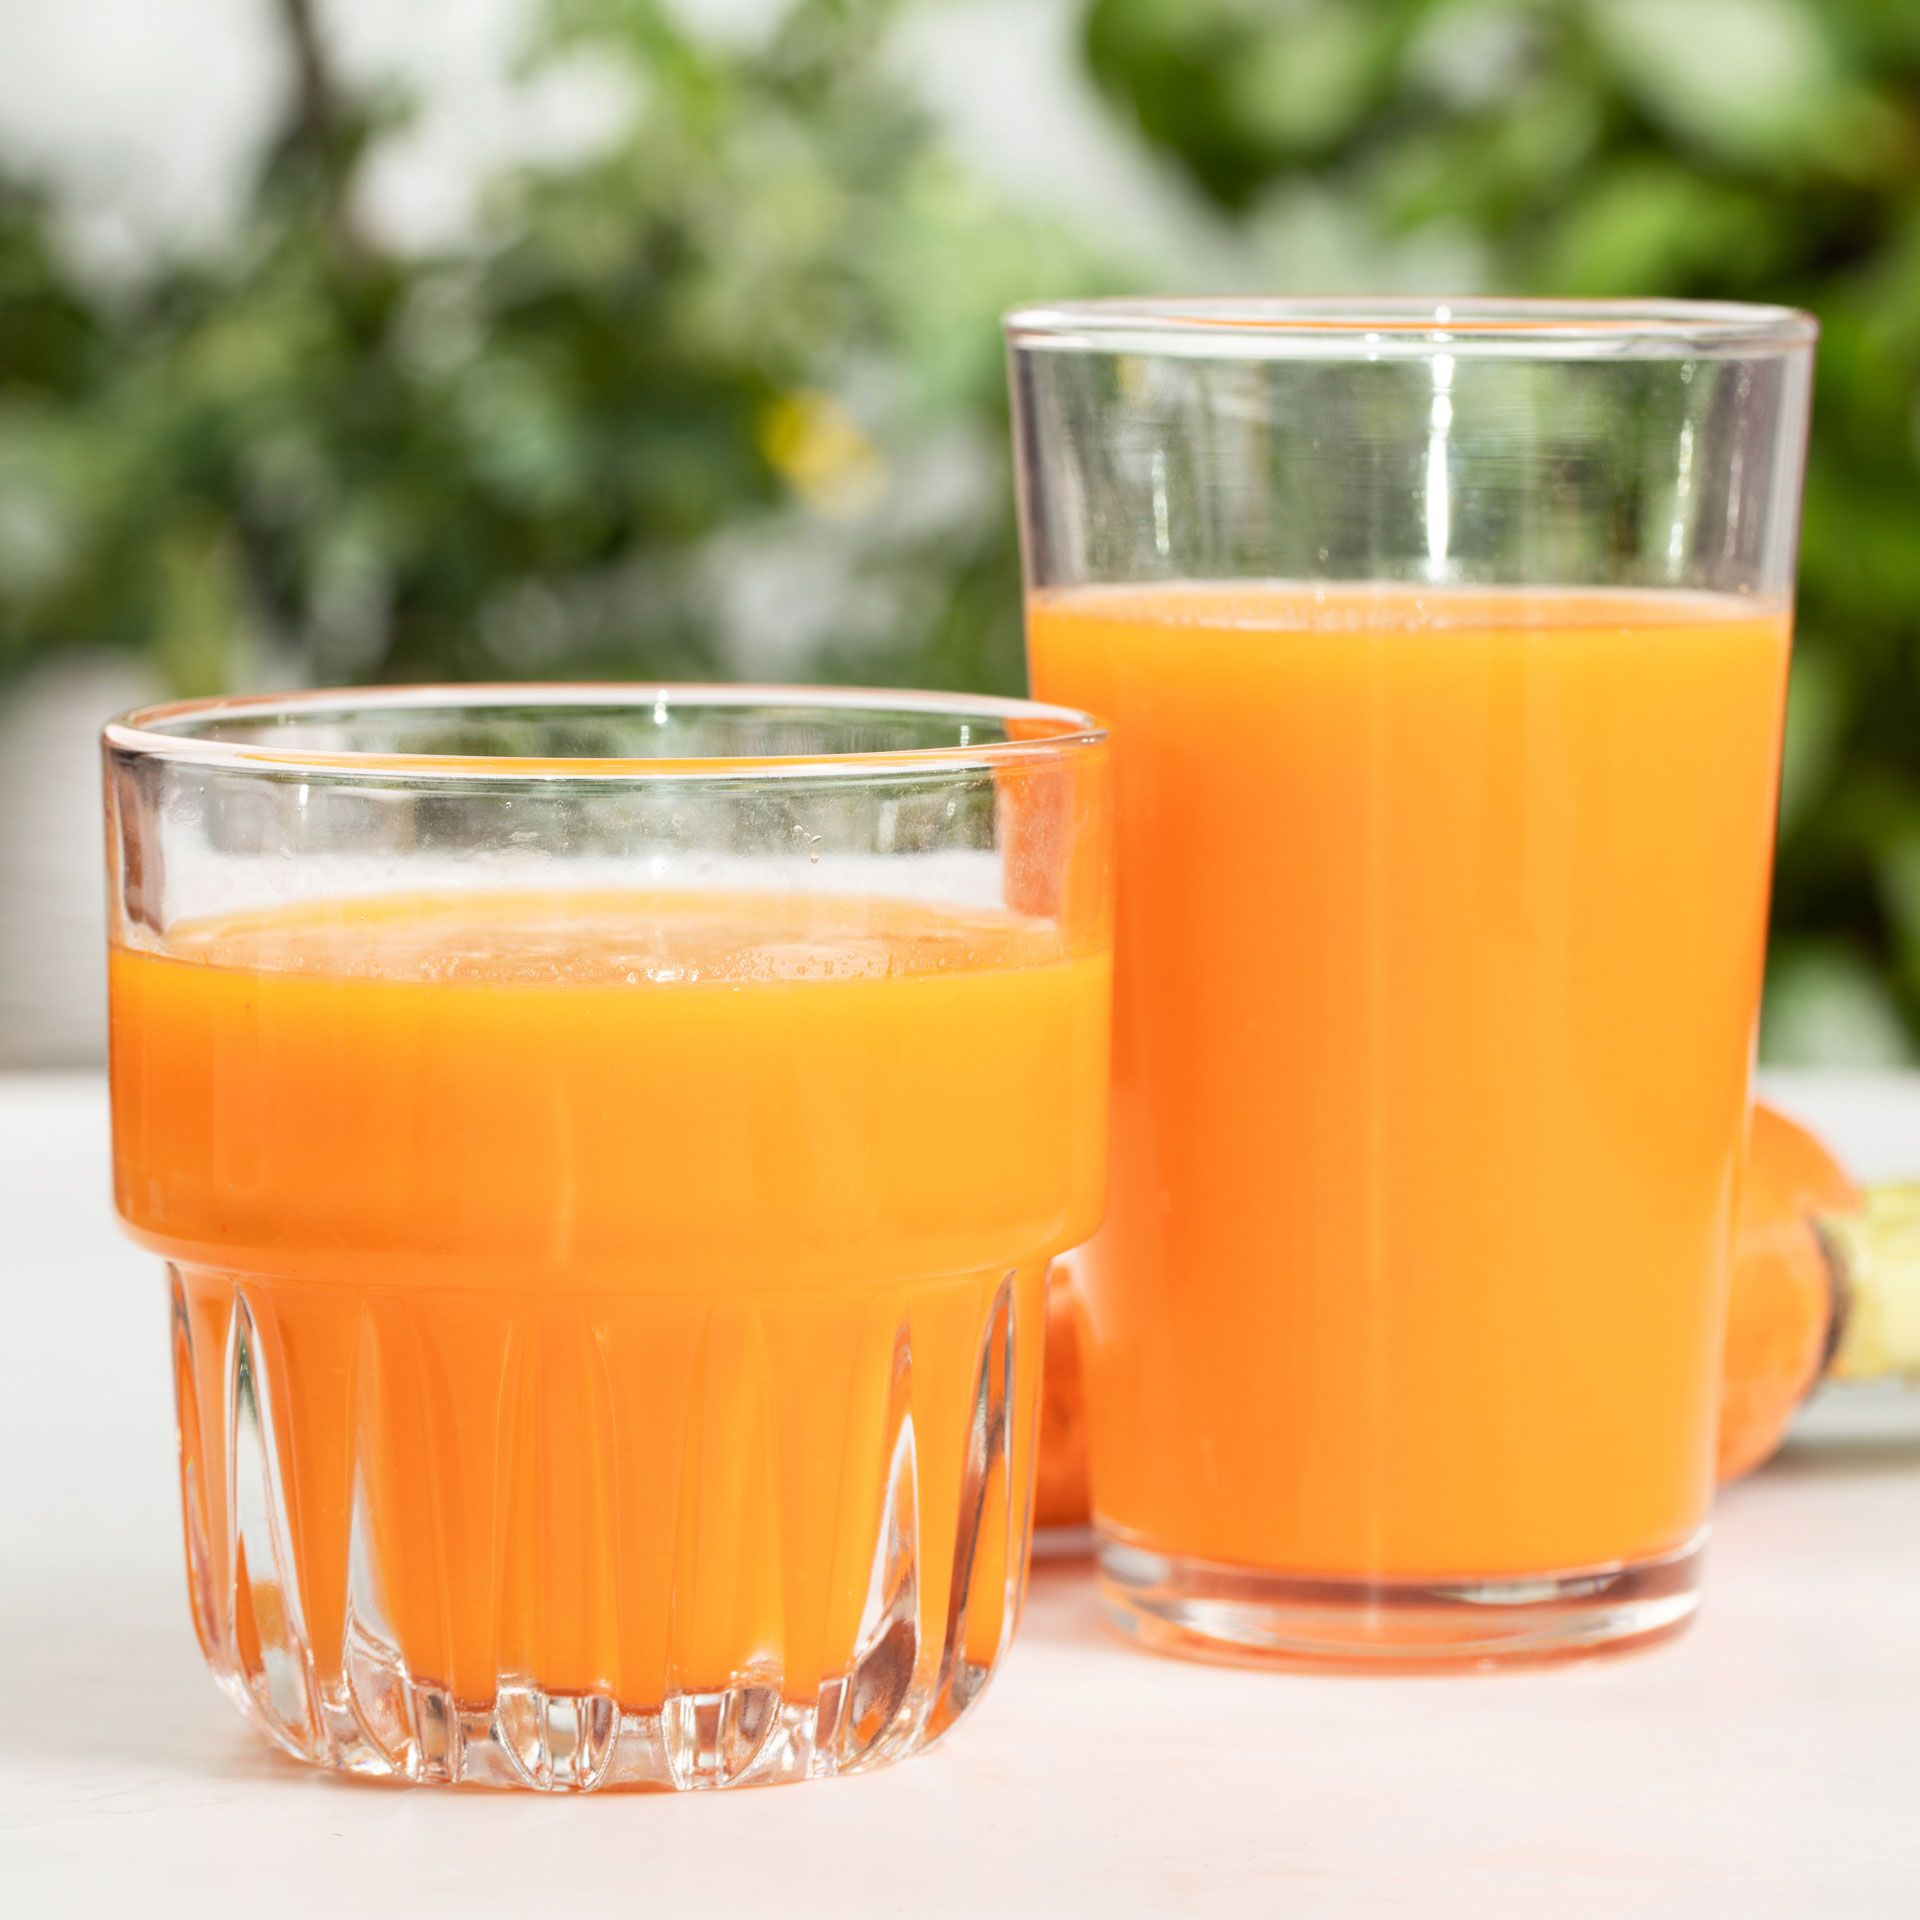 How Do You Make Carrot Juice Ingredients Typical Of Waropen City